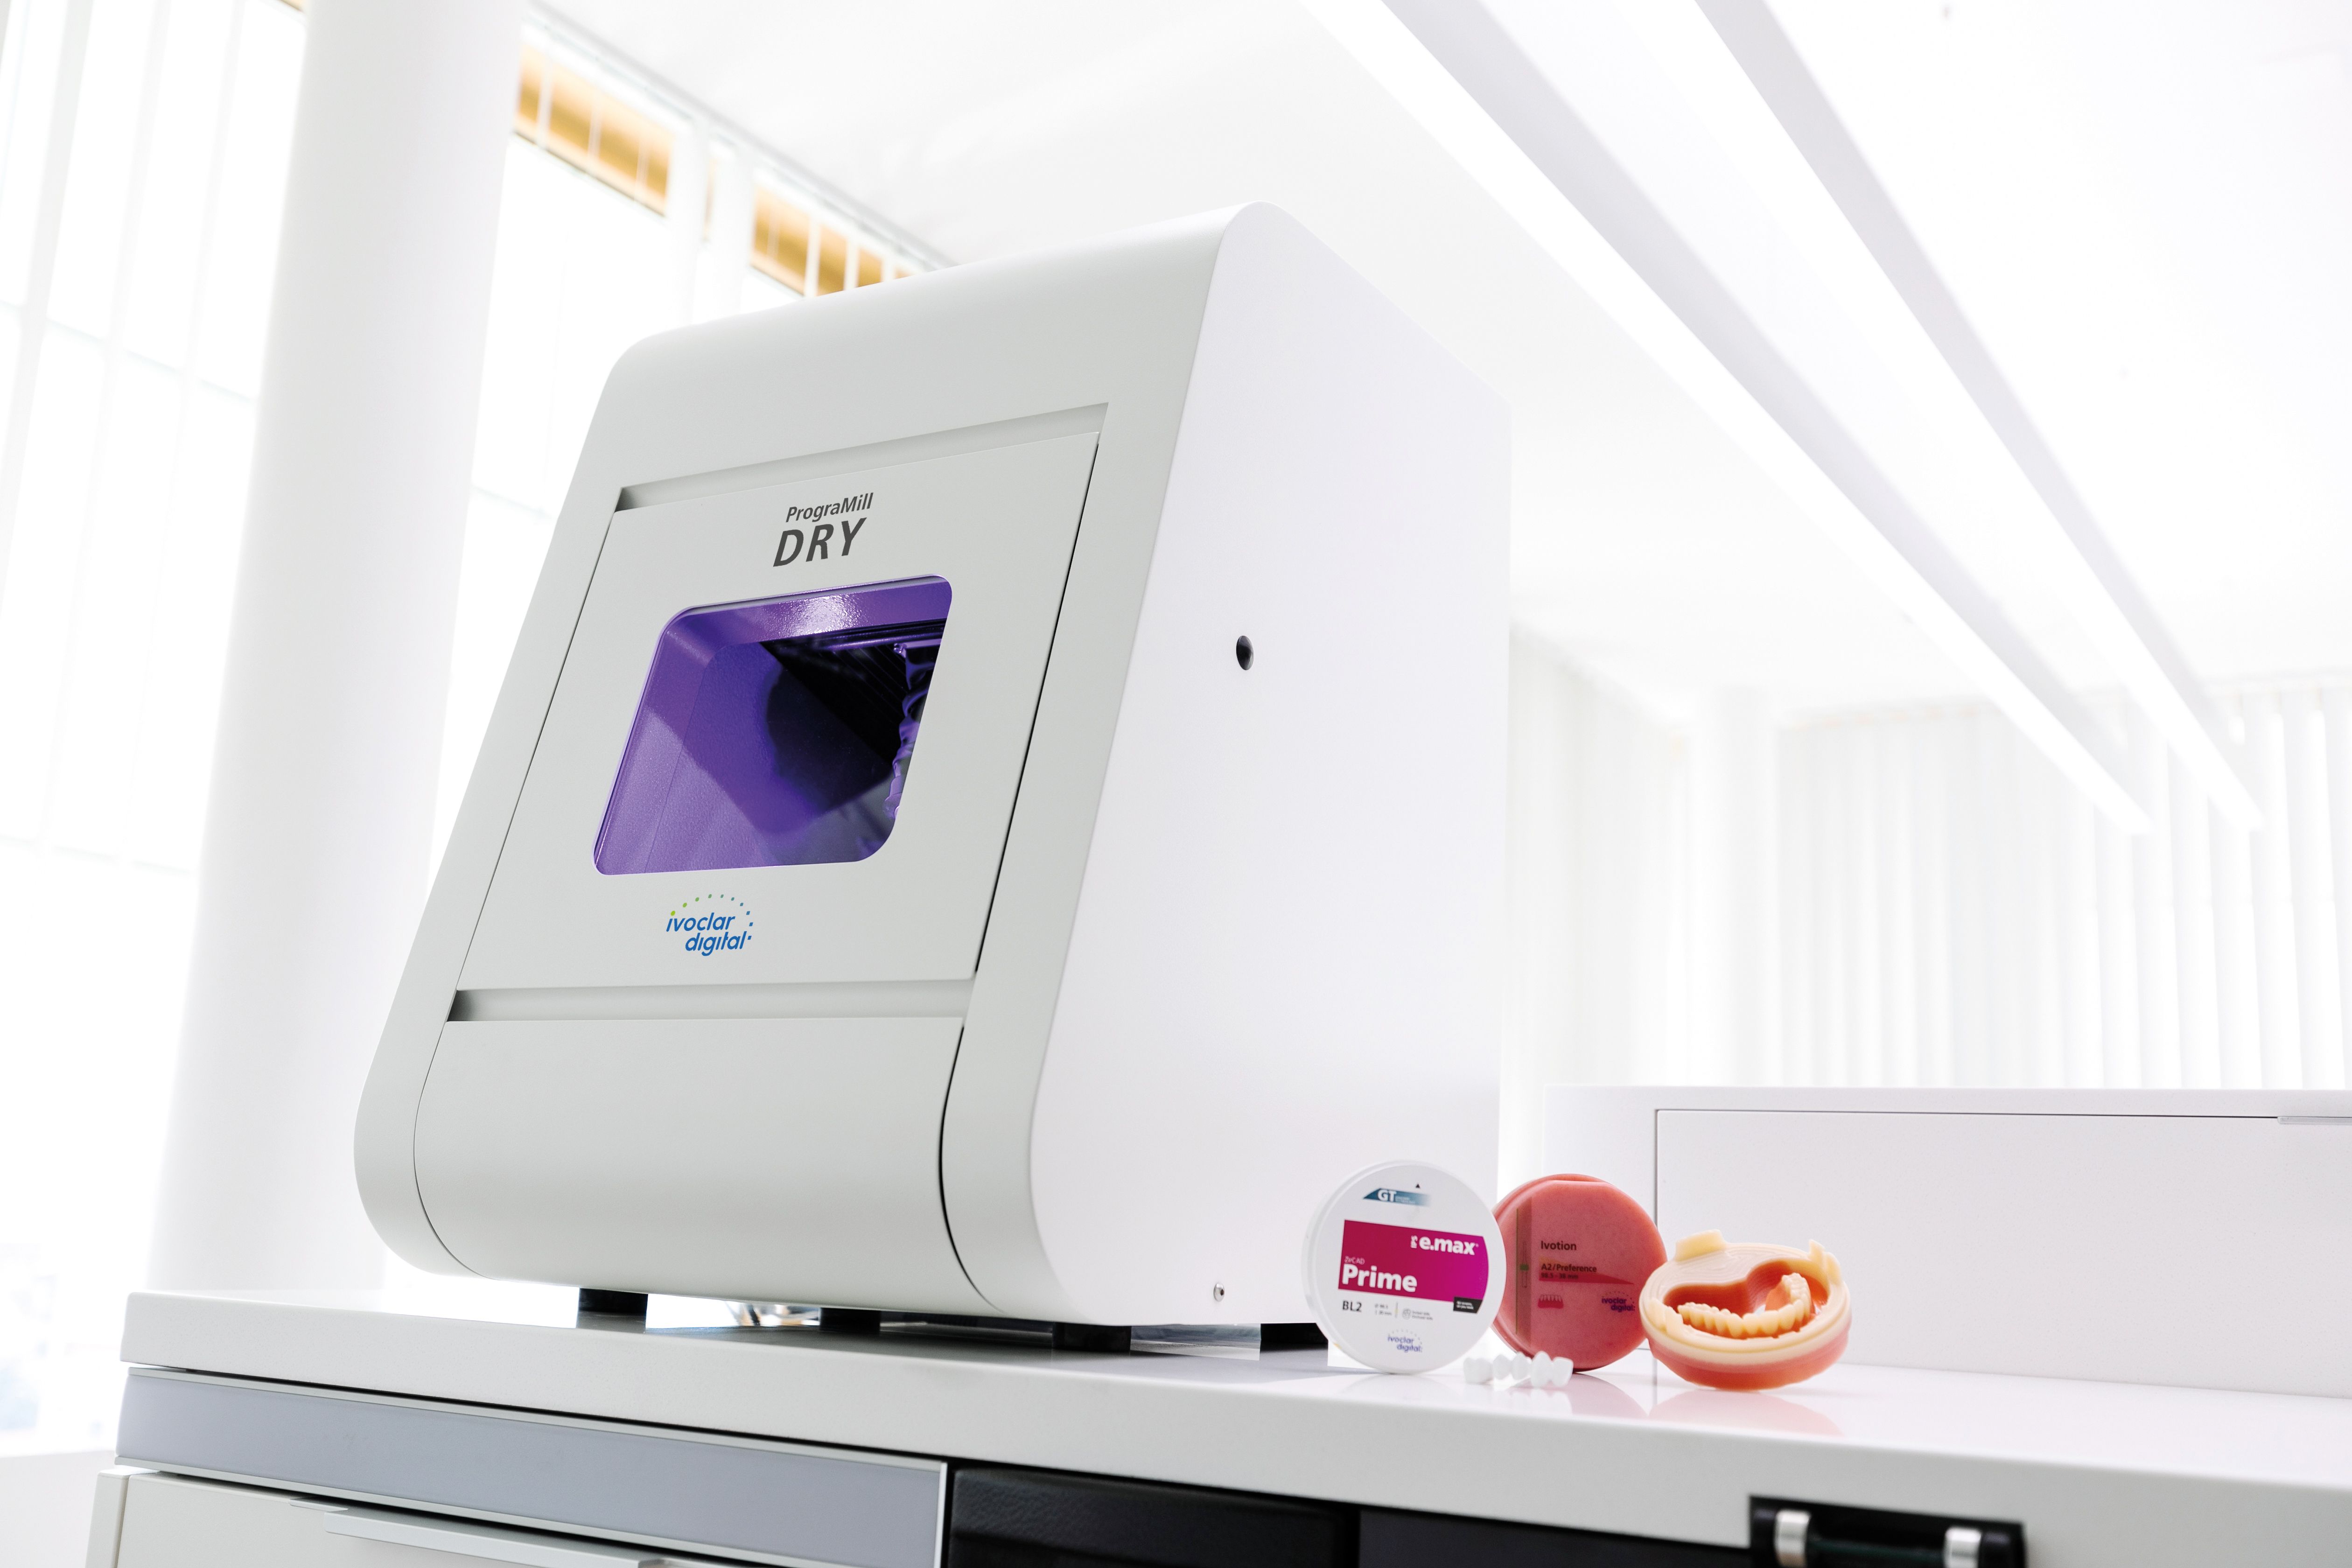 Ivoclar to exhibit their extended PrograMill range with the PrograMill Dry at the Dental Technology Showcase (DTS) 2022.